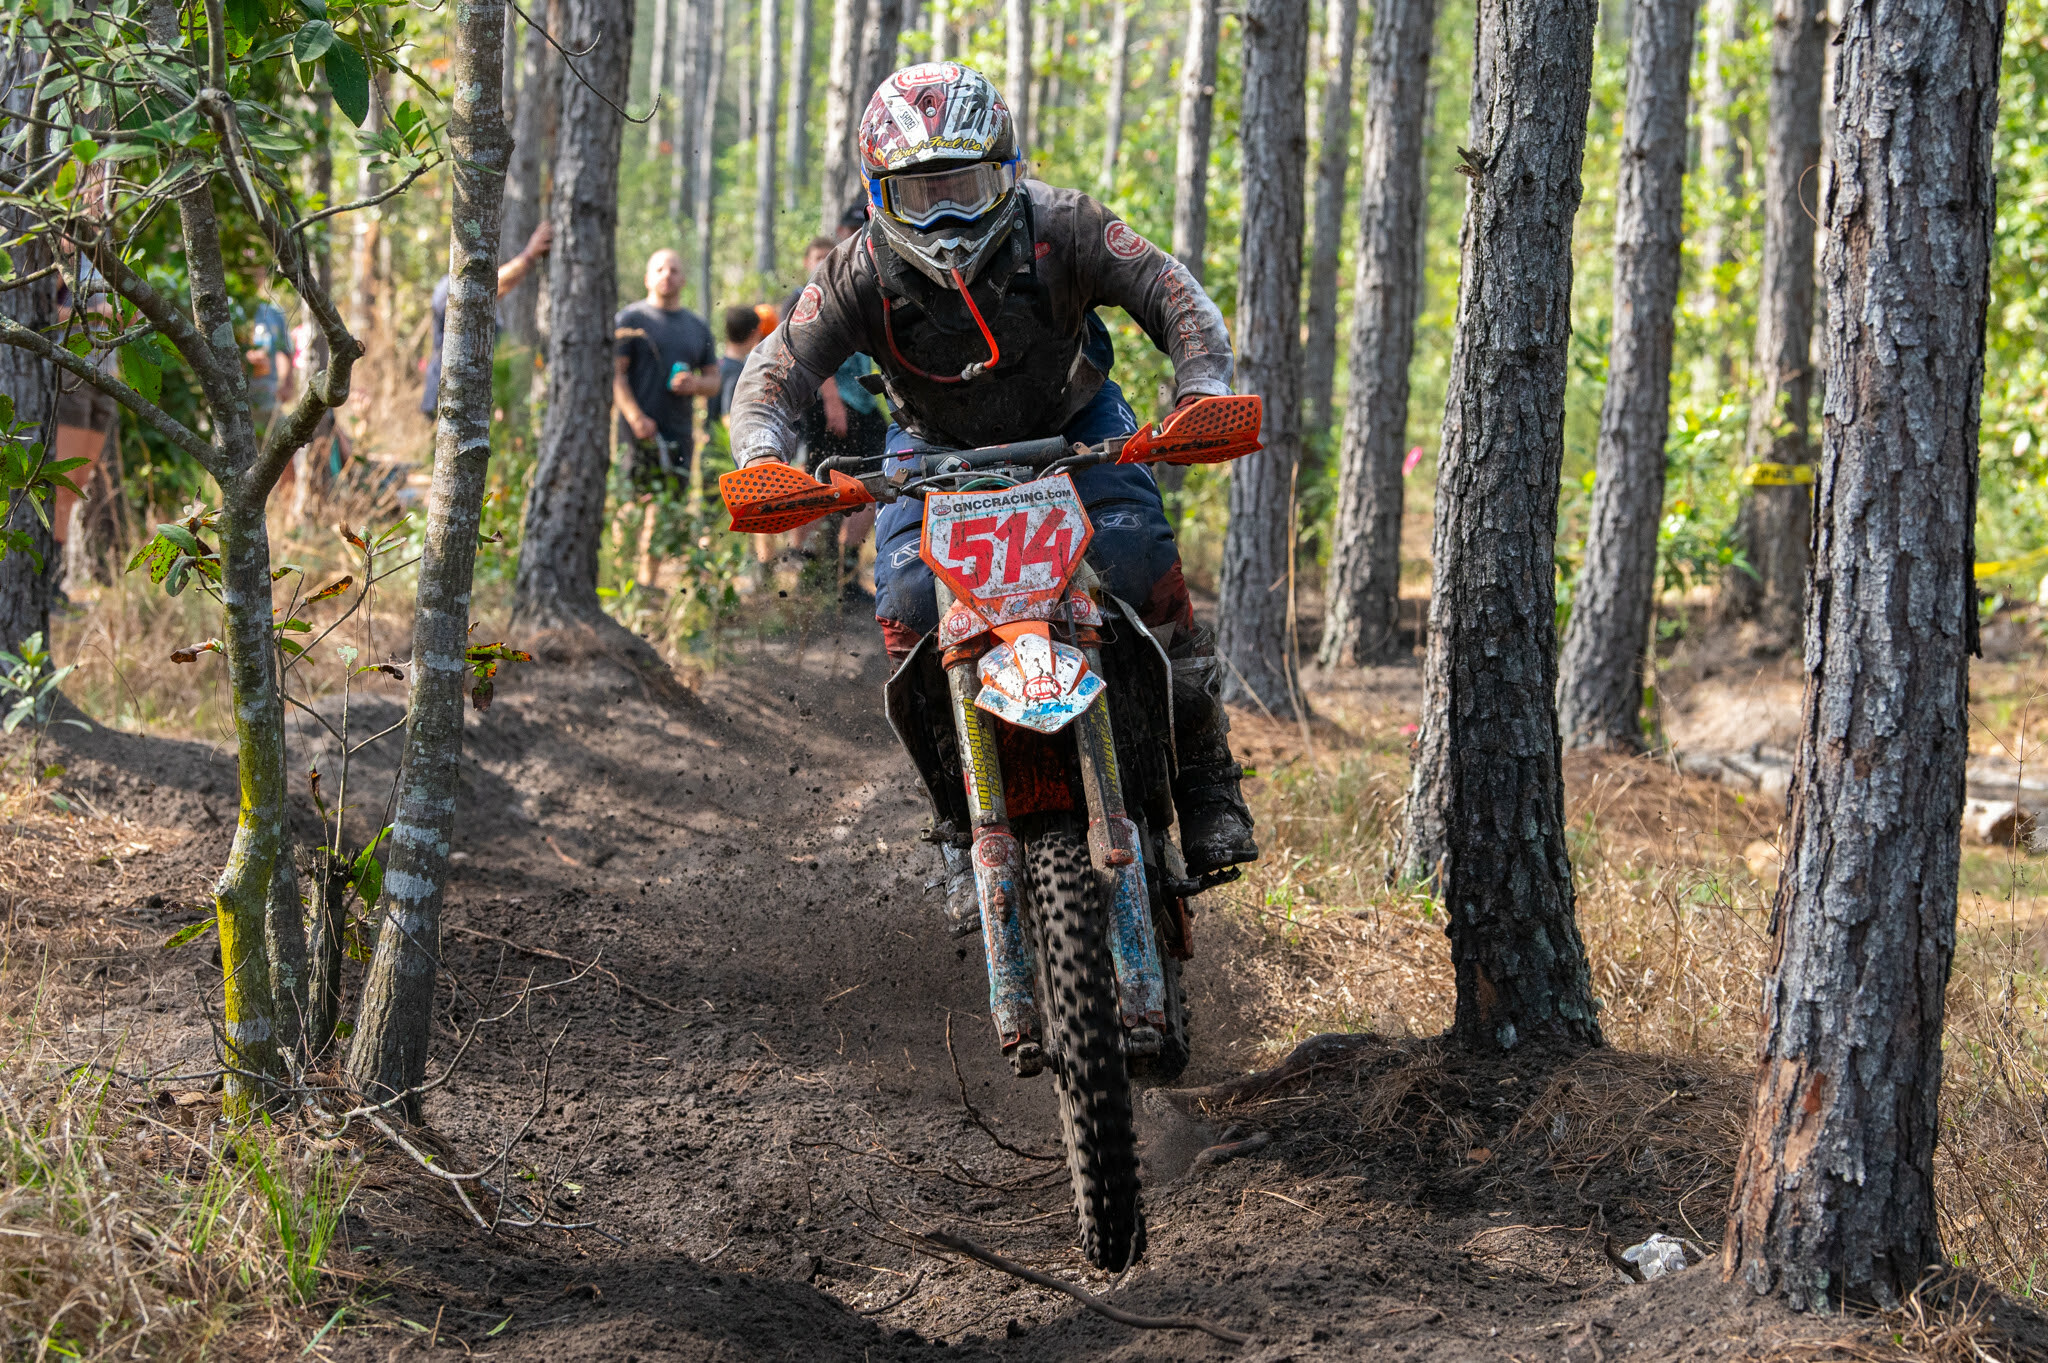 Steward Baylor (Rock Mountain/Tely Energy KTM Racing) battled back to earn second overall at round two.